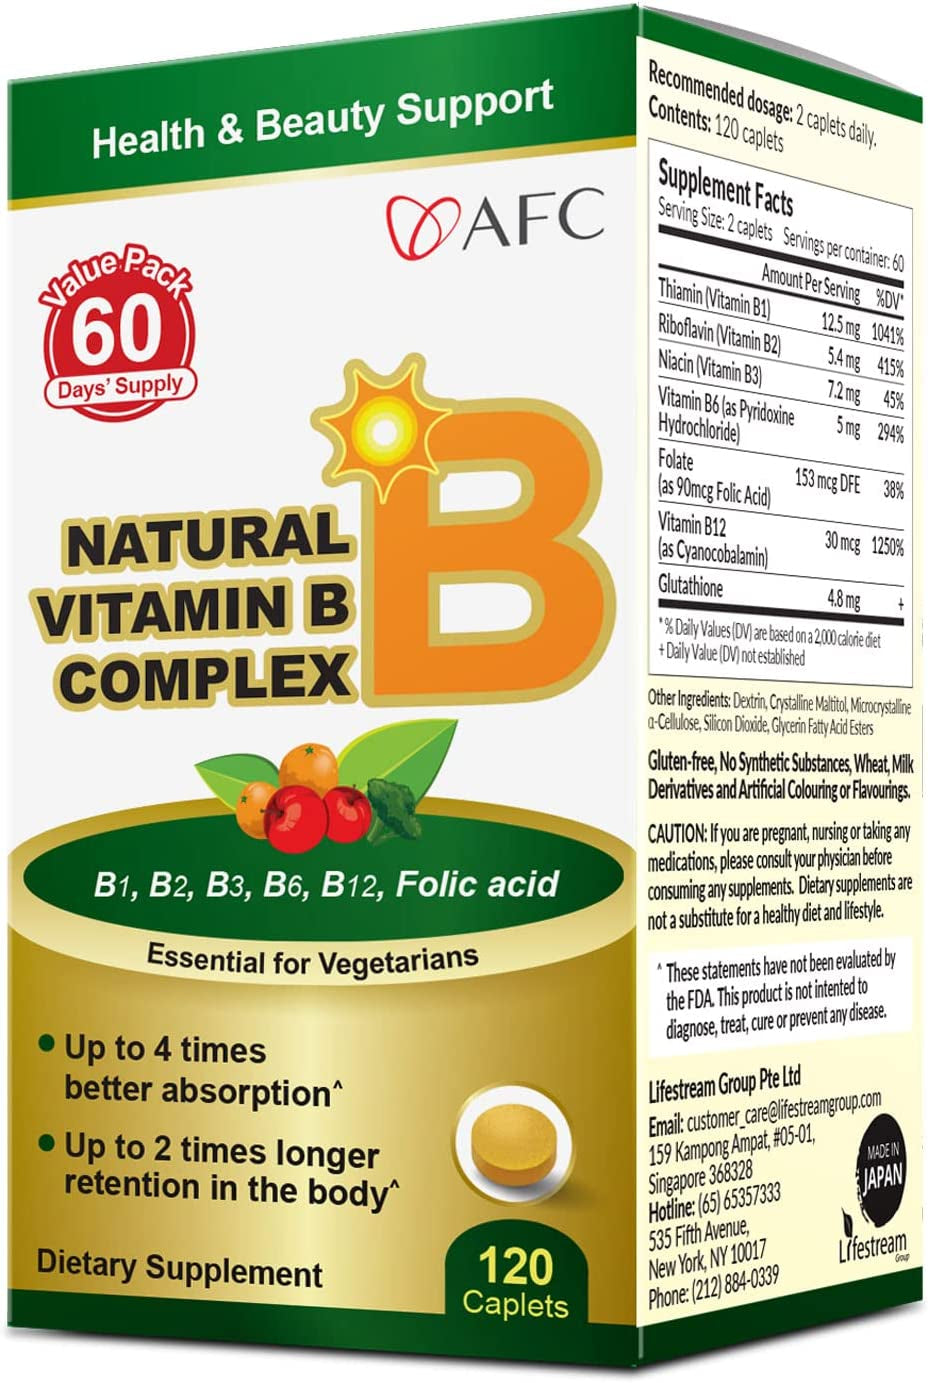 Japan Natural Vitamin B Complex - with B1, B2, B3, B6, B12, Folic Acid and Glutathione Yeast Extract - Supplement for Stress, Energy, Immune and Nervous System Support – Vegan, 120 Caplets